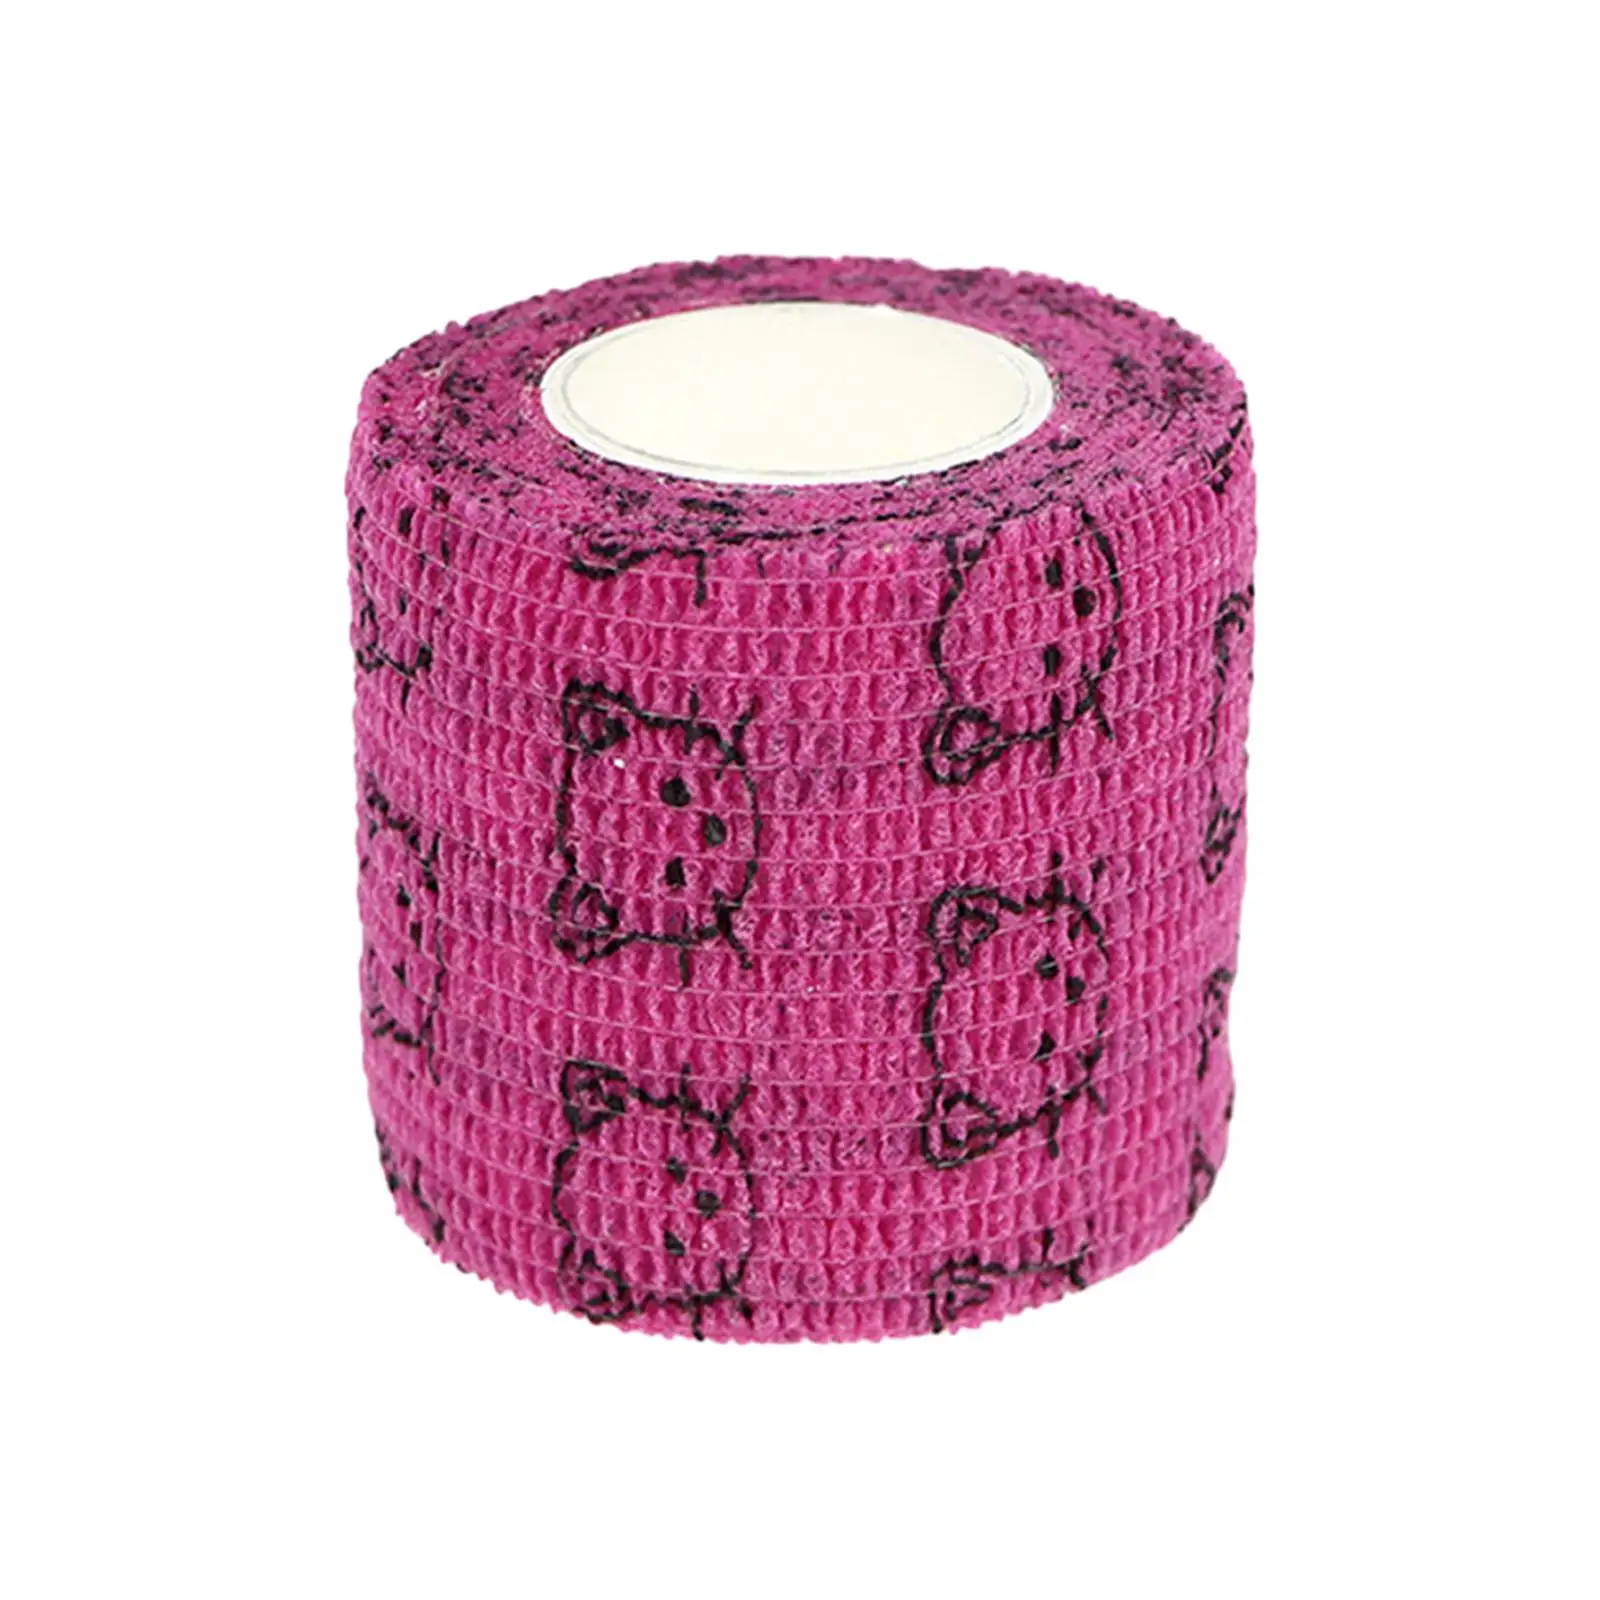 Self Adhesive Elastic Bandage Multi Function Width 2.5cm Sports Wrap Tape for Small Animal Finger Palm Shoulder Workout